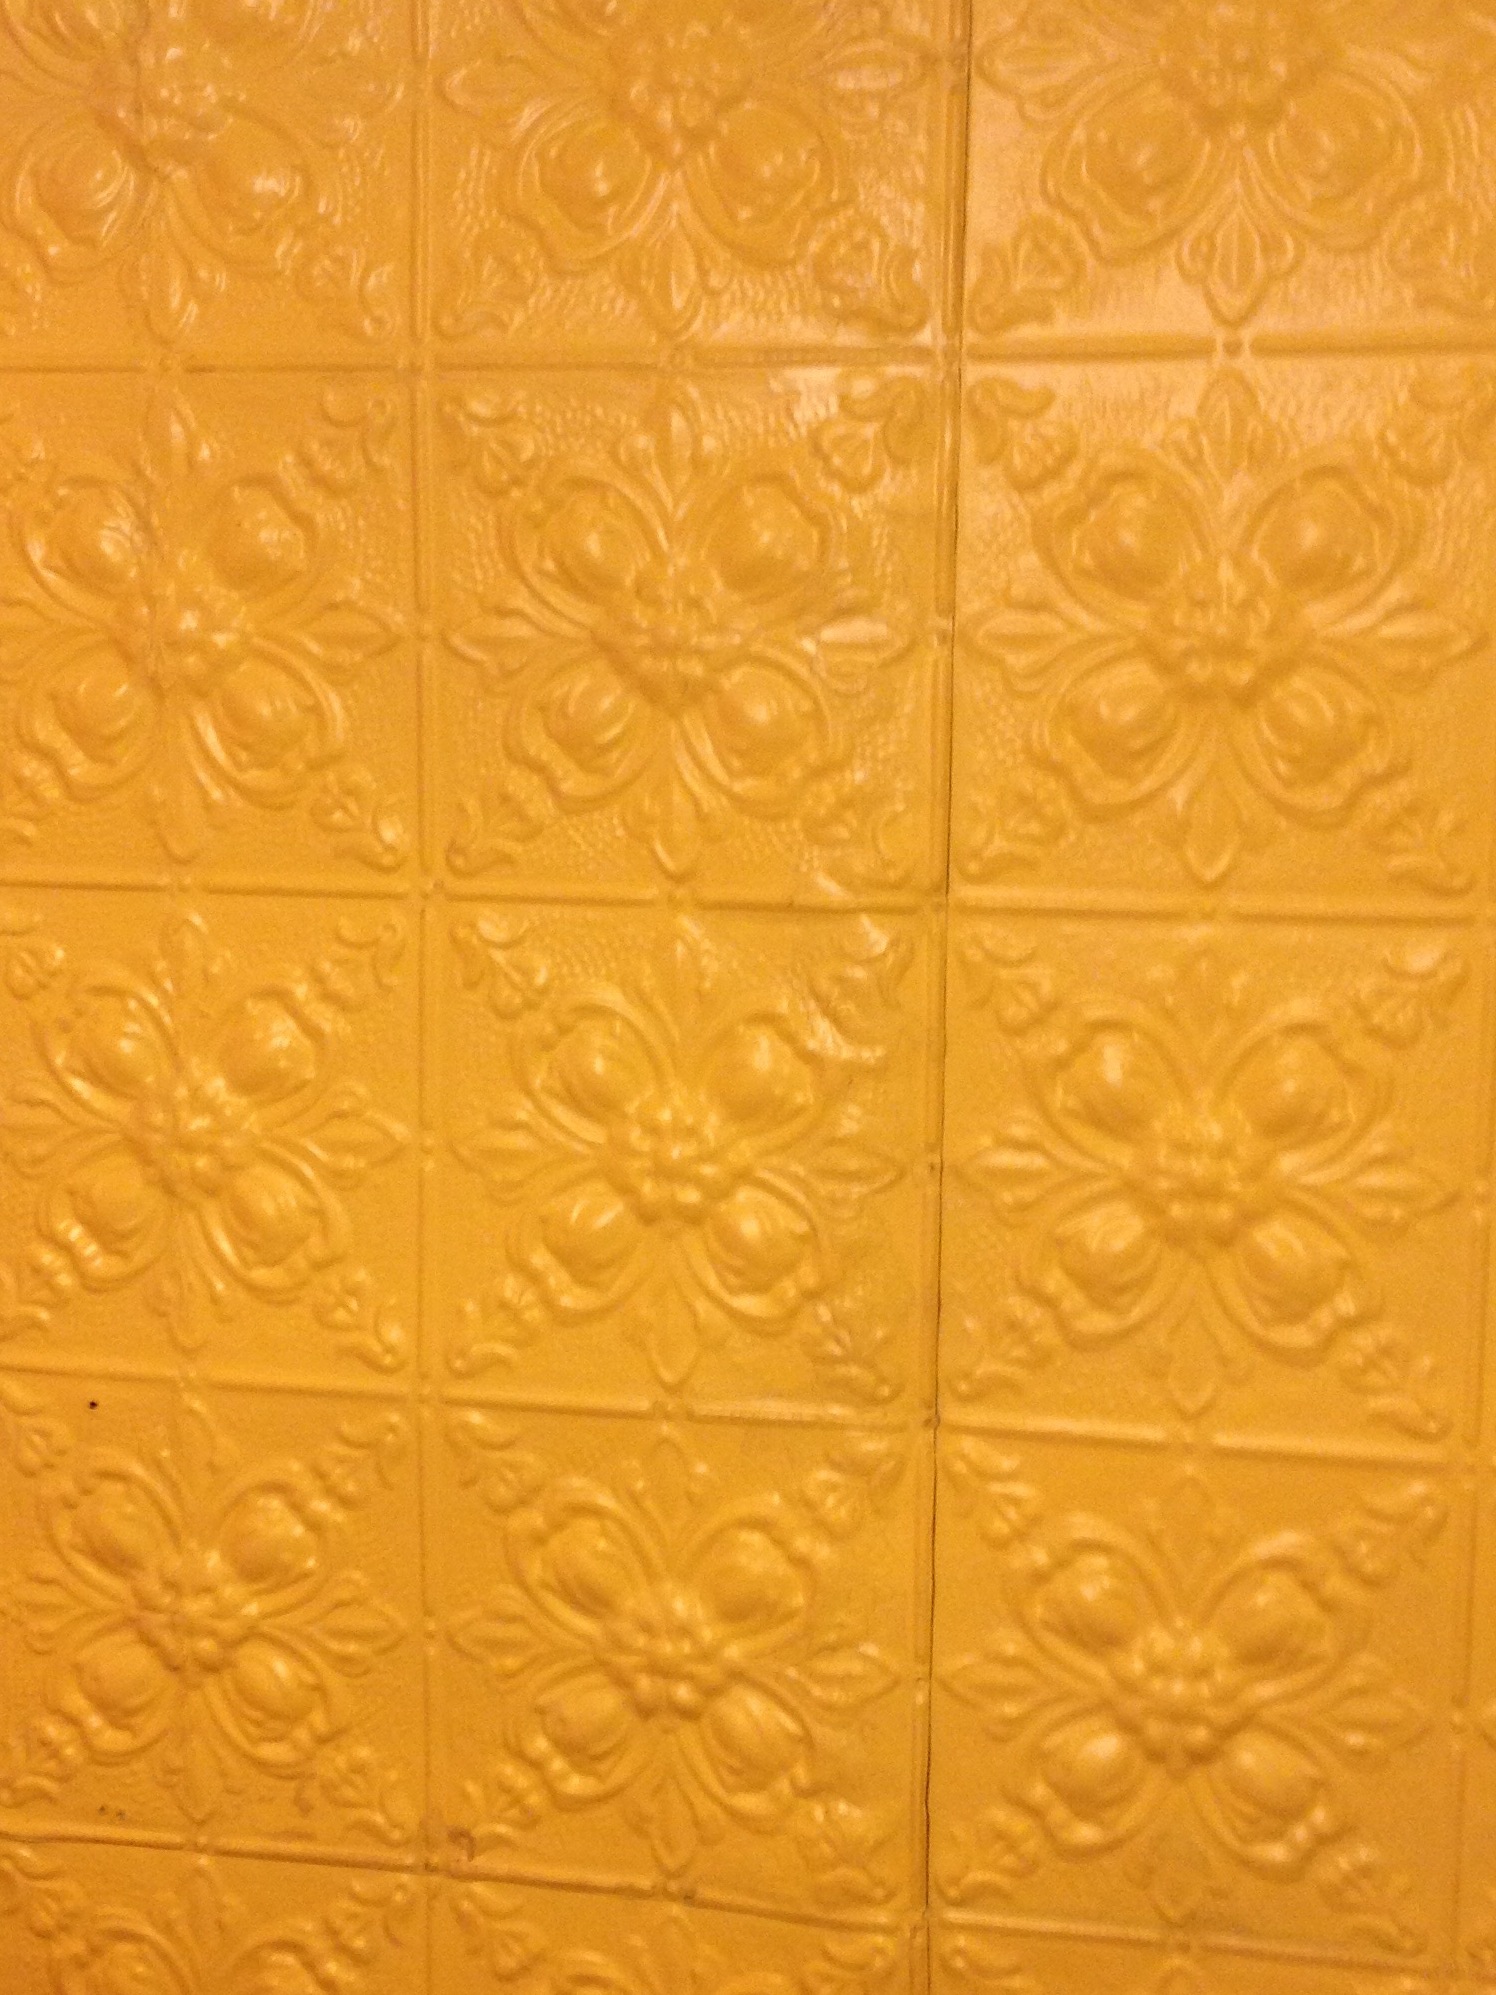 a wall covered in a tile pattern with only two different colors